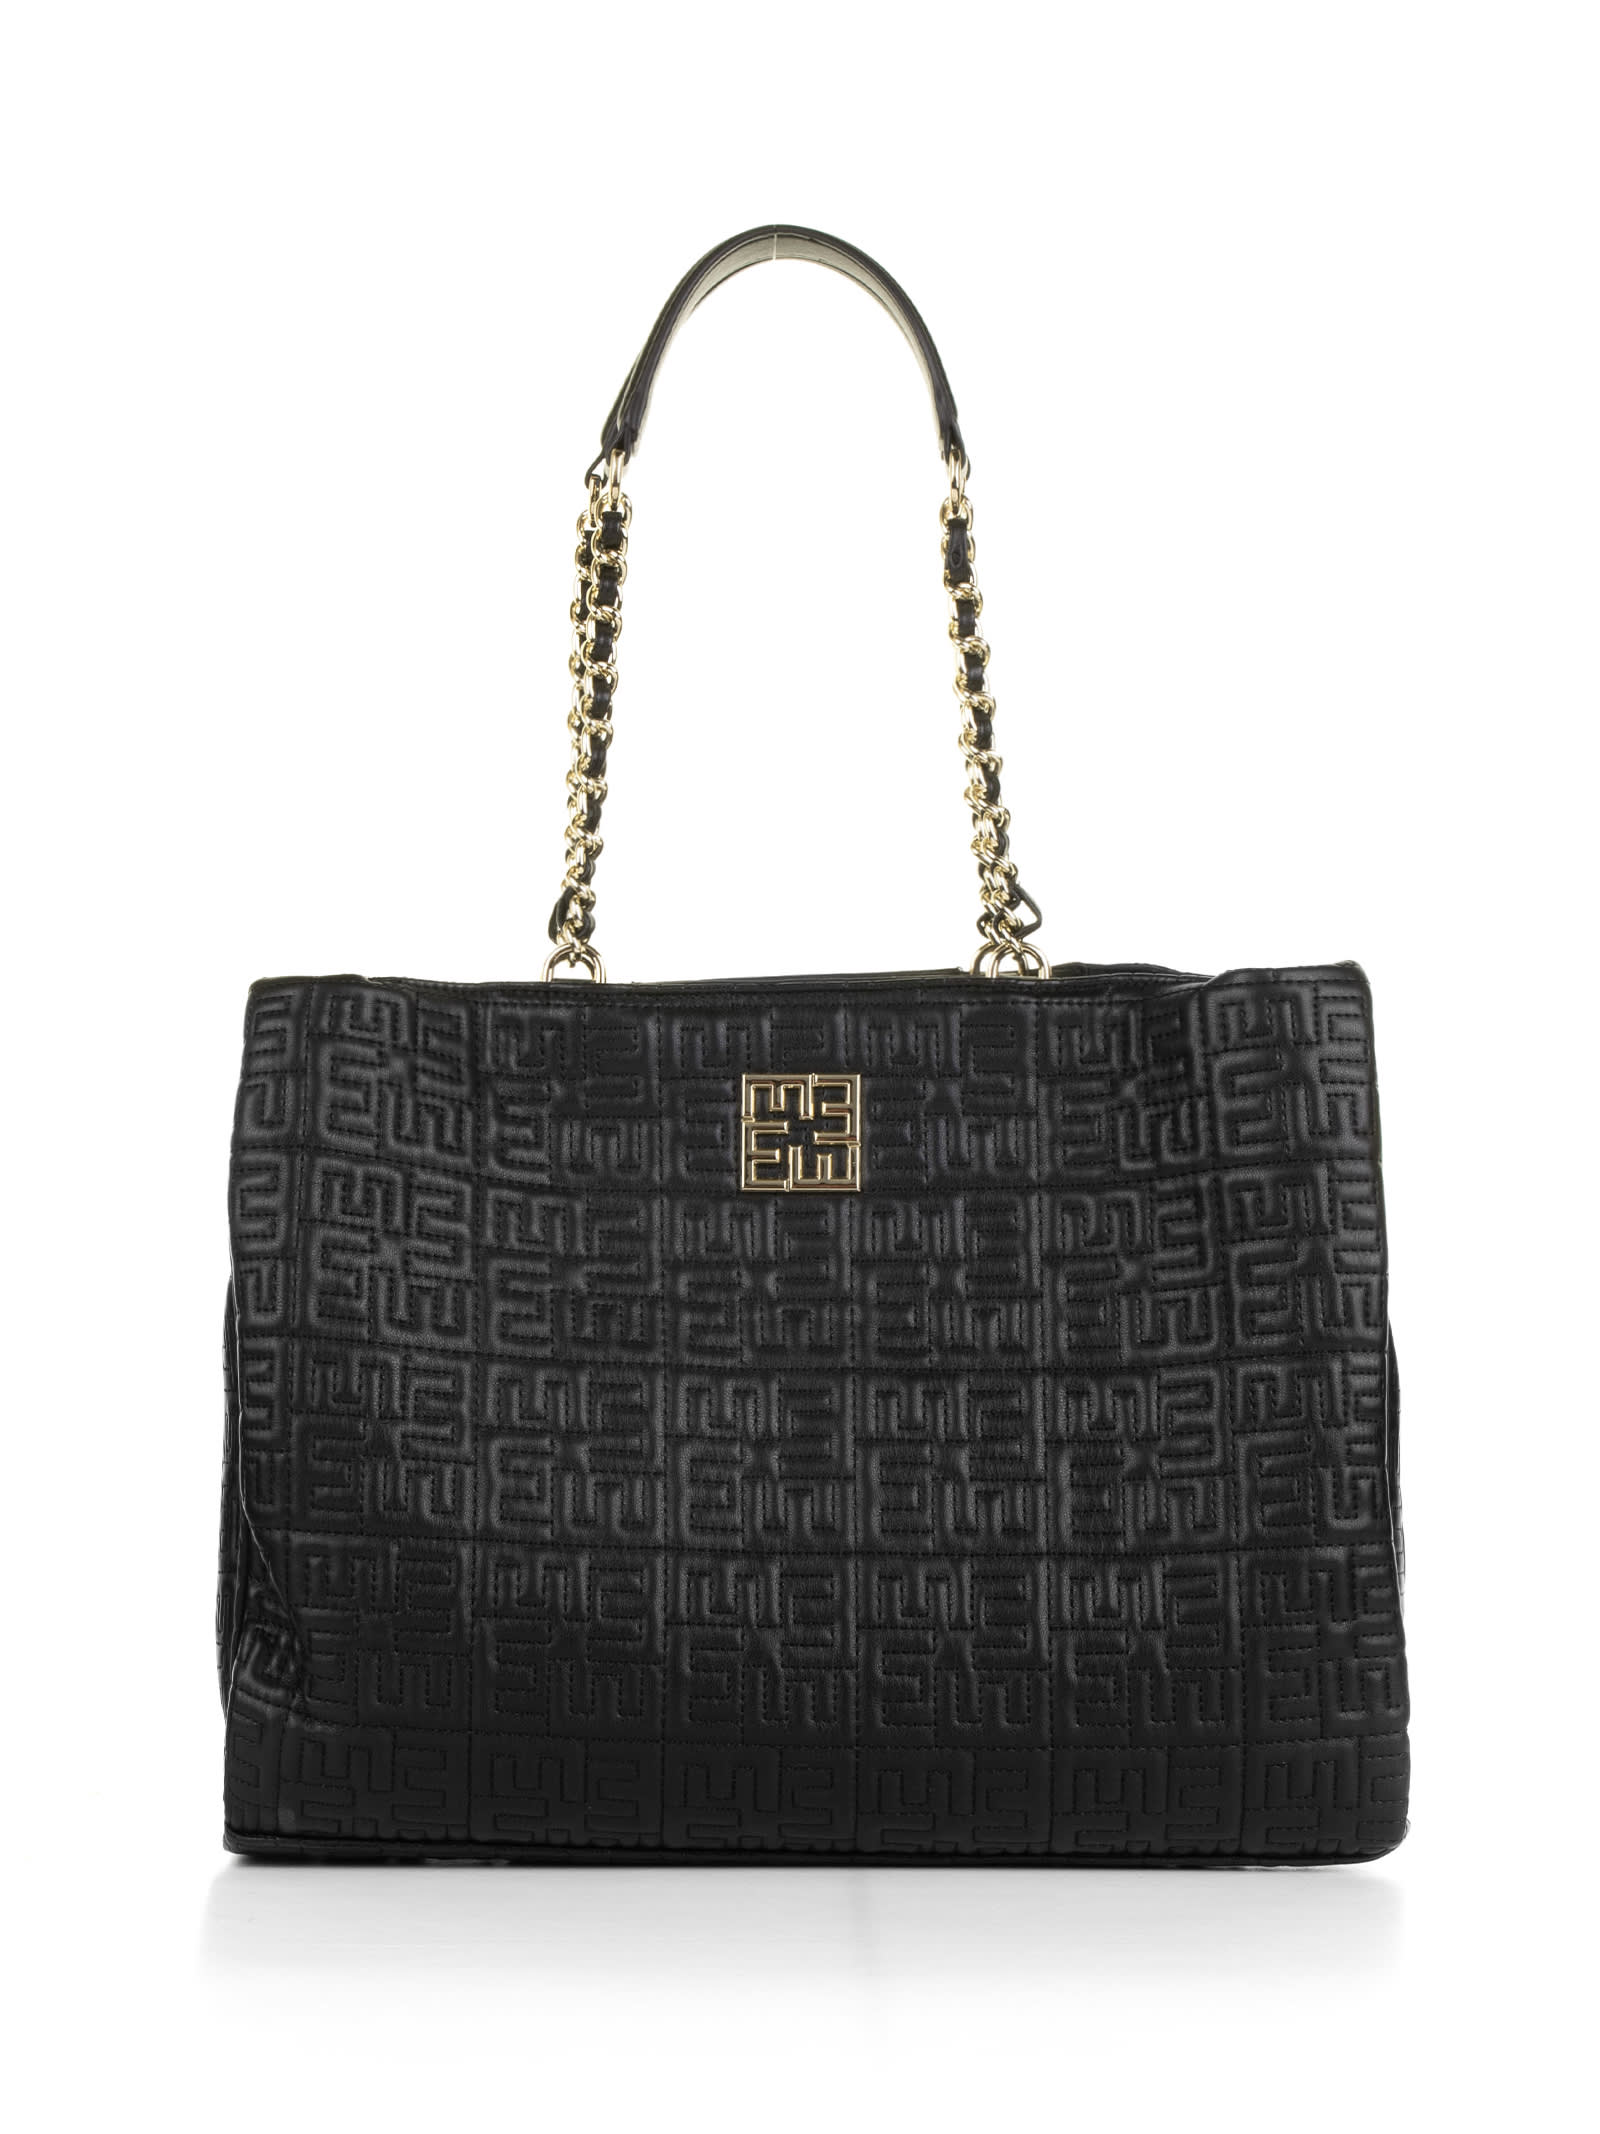 Ermanno Scervino Rosemary Large Black Leather Tote Bag